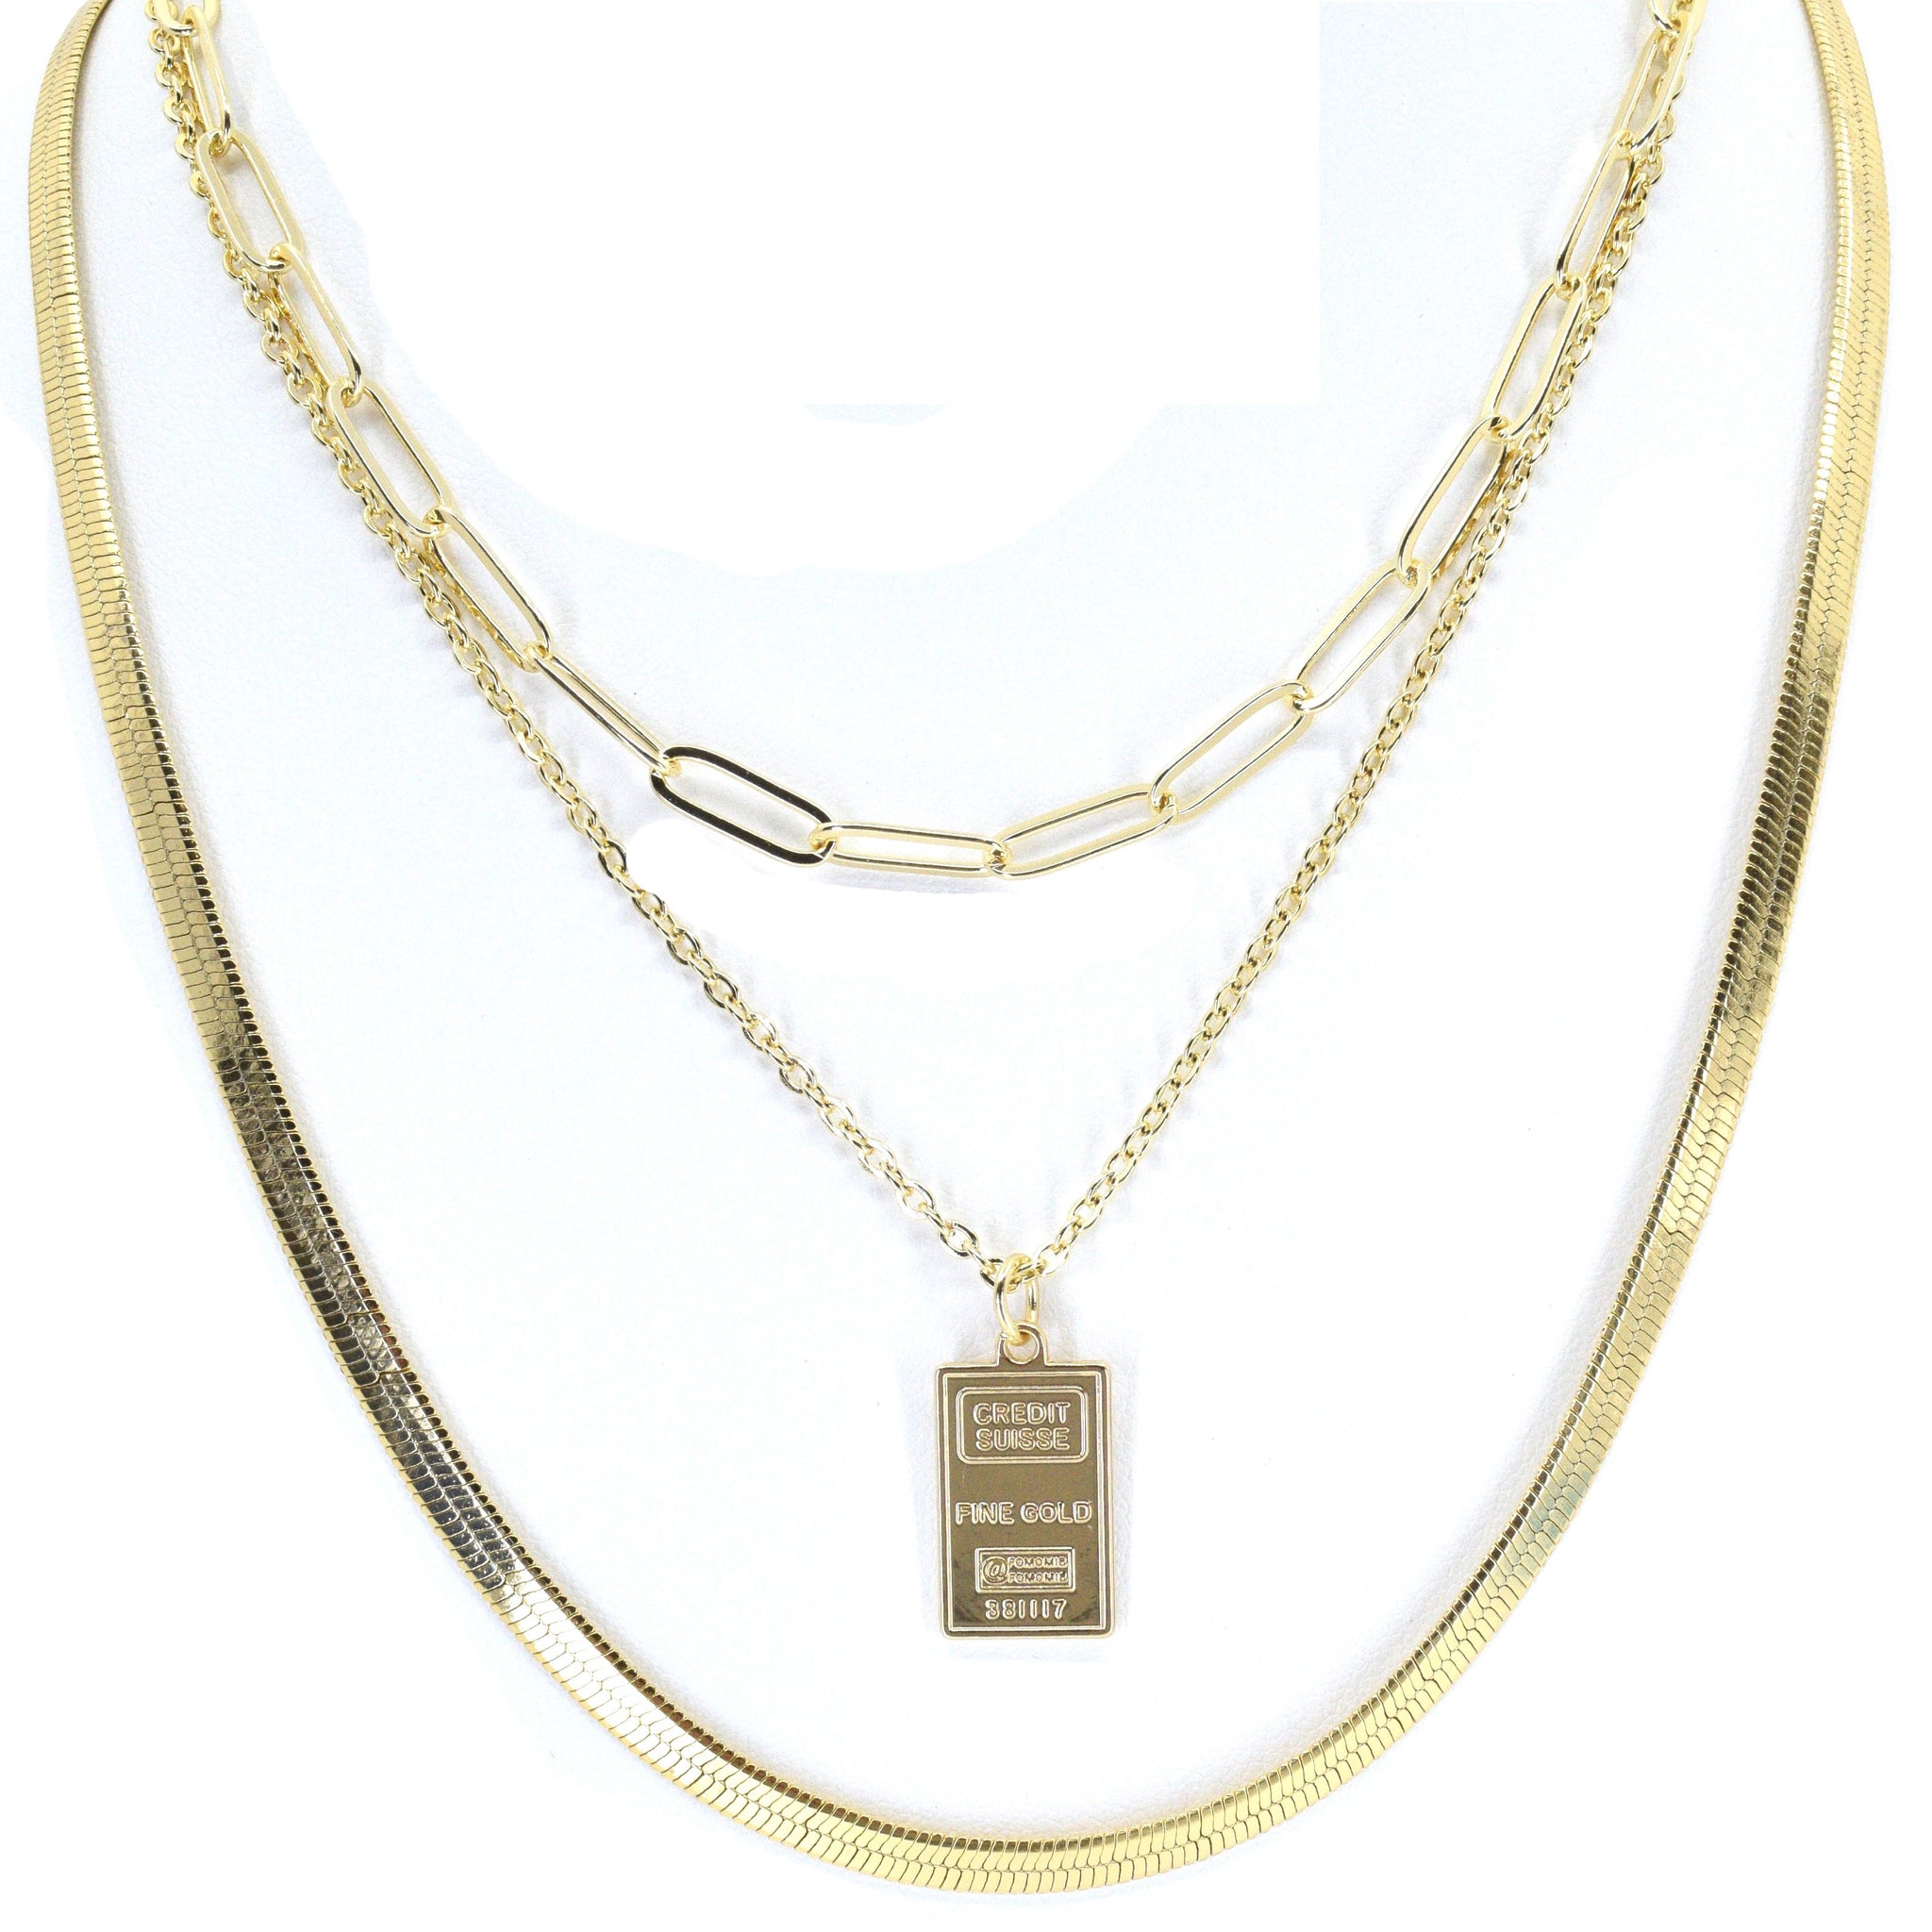 Gold Layered Necklace Set #1 - Save 20%!